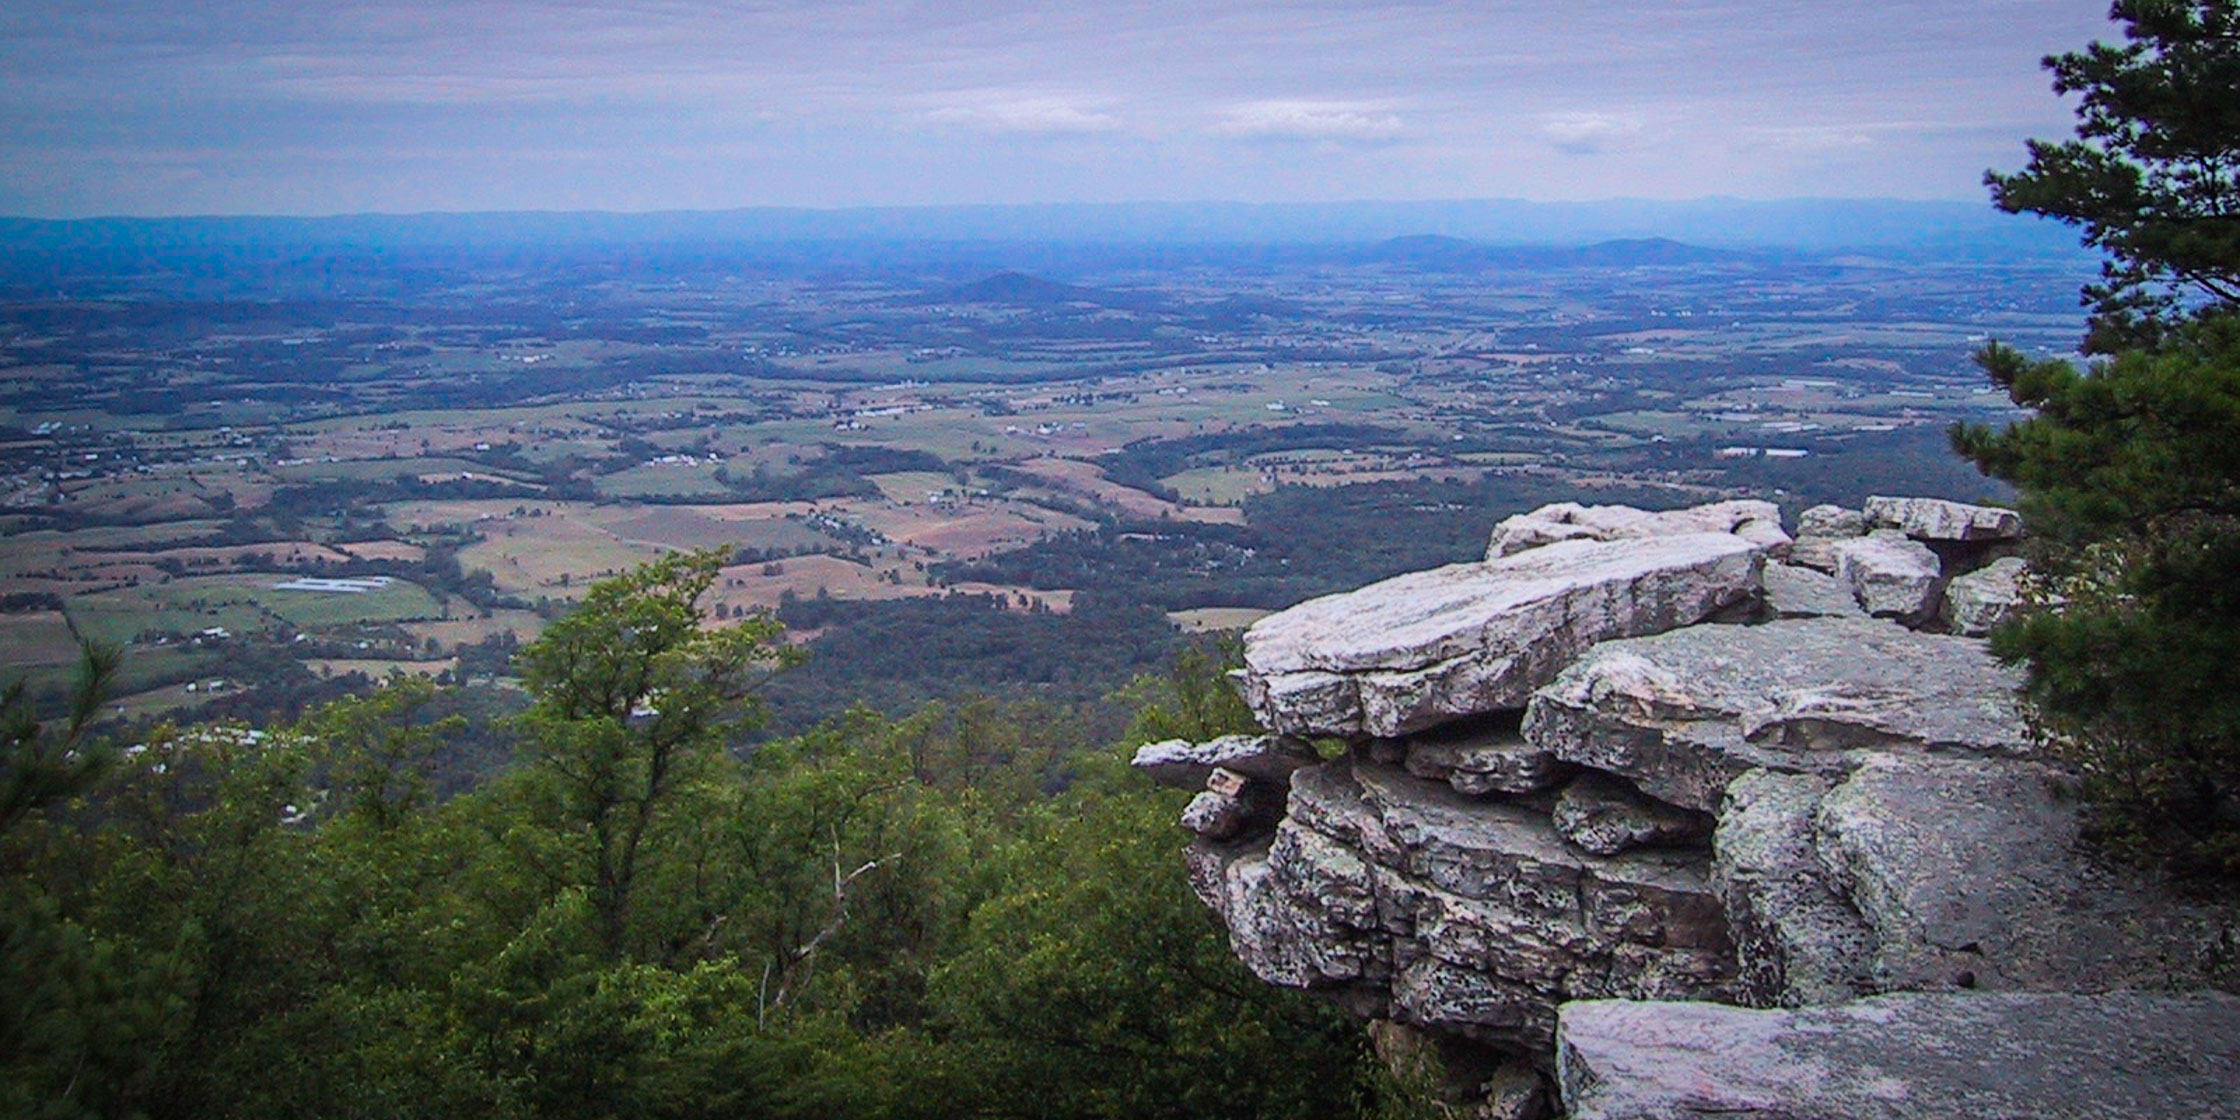 The view of the Shenandoah Valley from Bird Knob